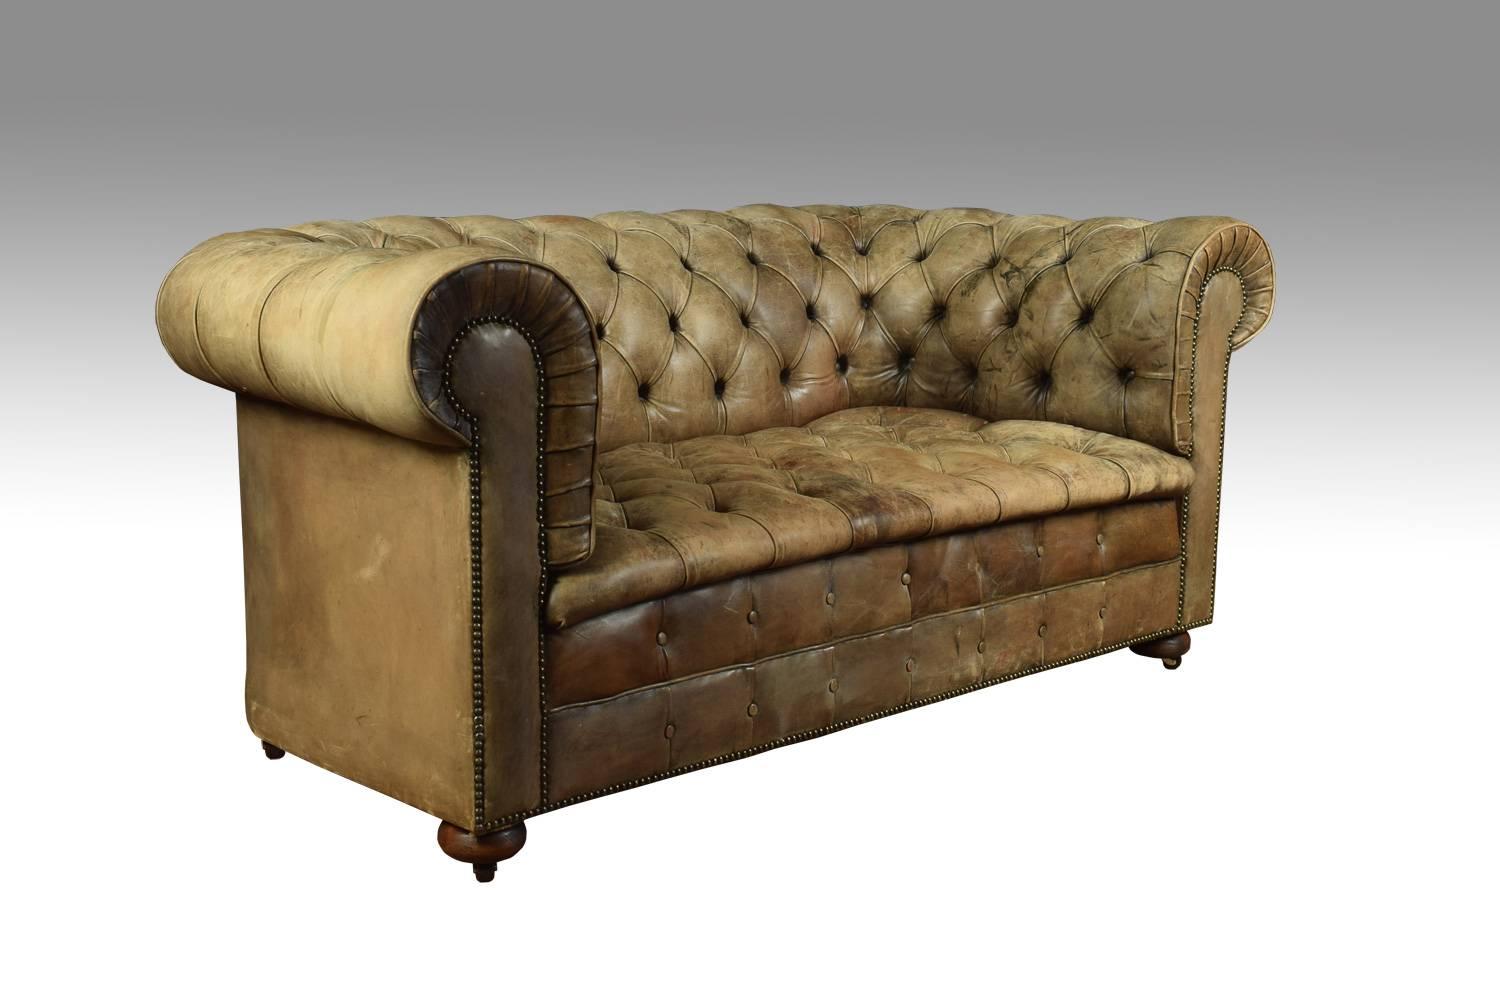 Two-seat light brown coloured leather Chesterfield sofa, partially sun bleached in places, on bun feet with brass ceramic castors. Good solid condition, the leather is soft, nicely worn in.
Dimensions:
Height 31 inches height to seat 17.5